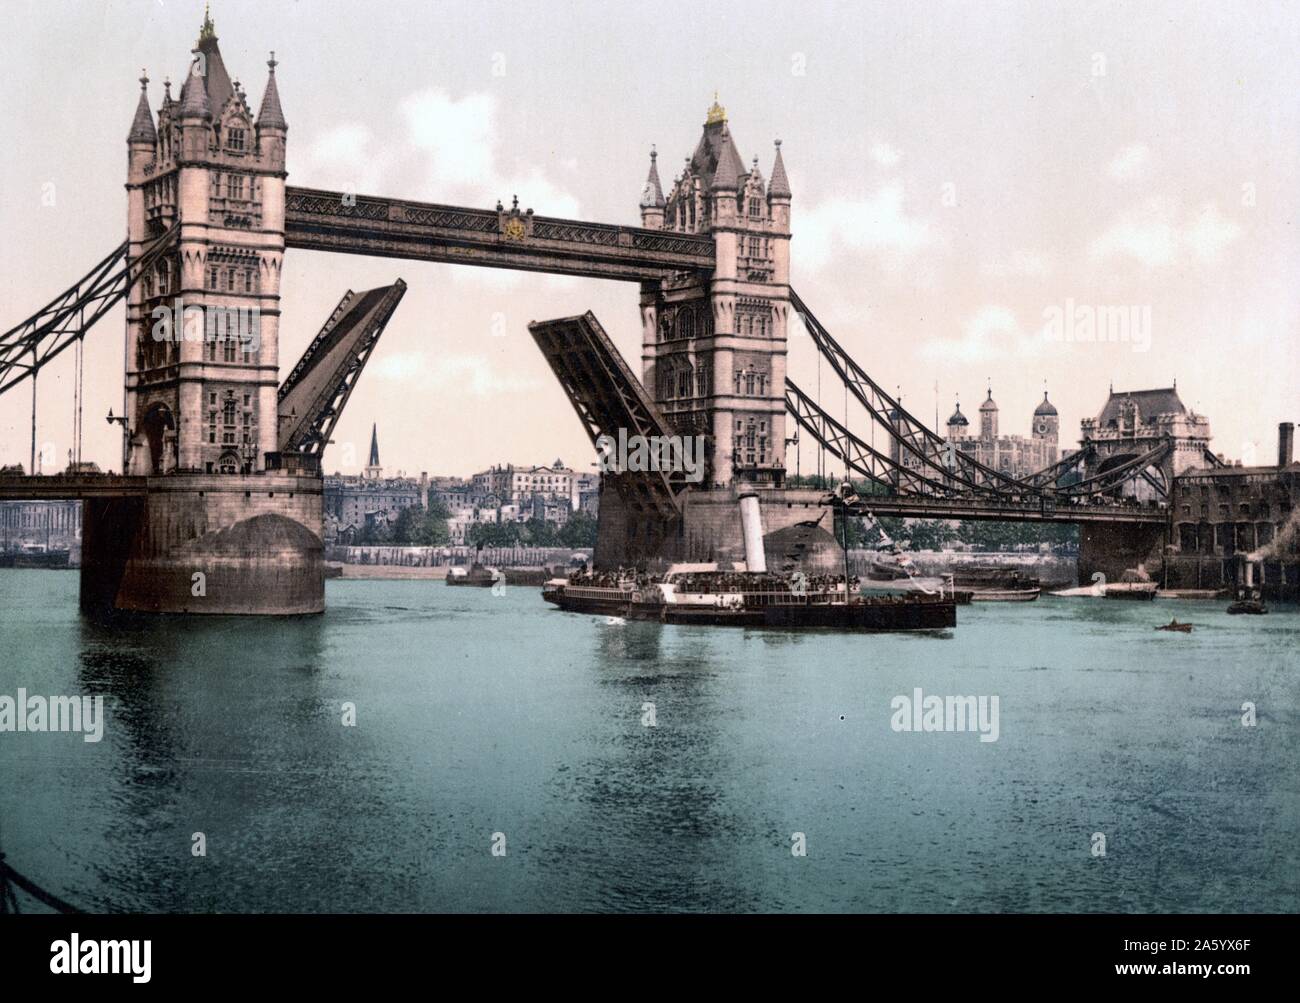 Paddle steam boat on the River Thames with the Tower of Londion, Tower Bridge, London, England 1895-1900 Stock Photo